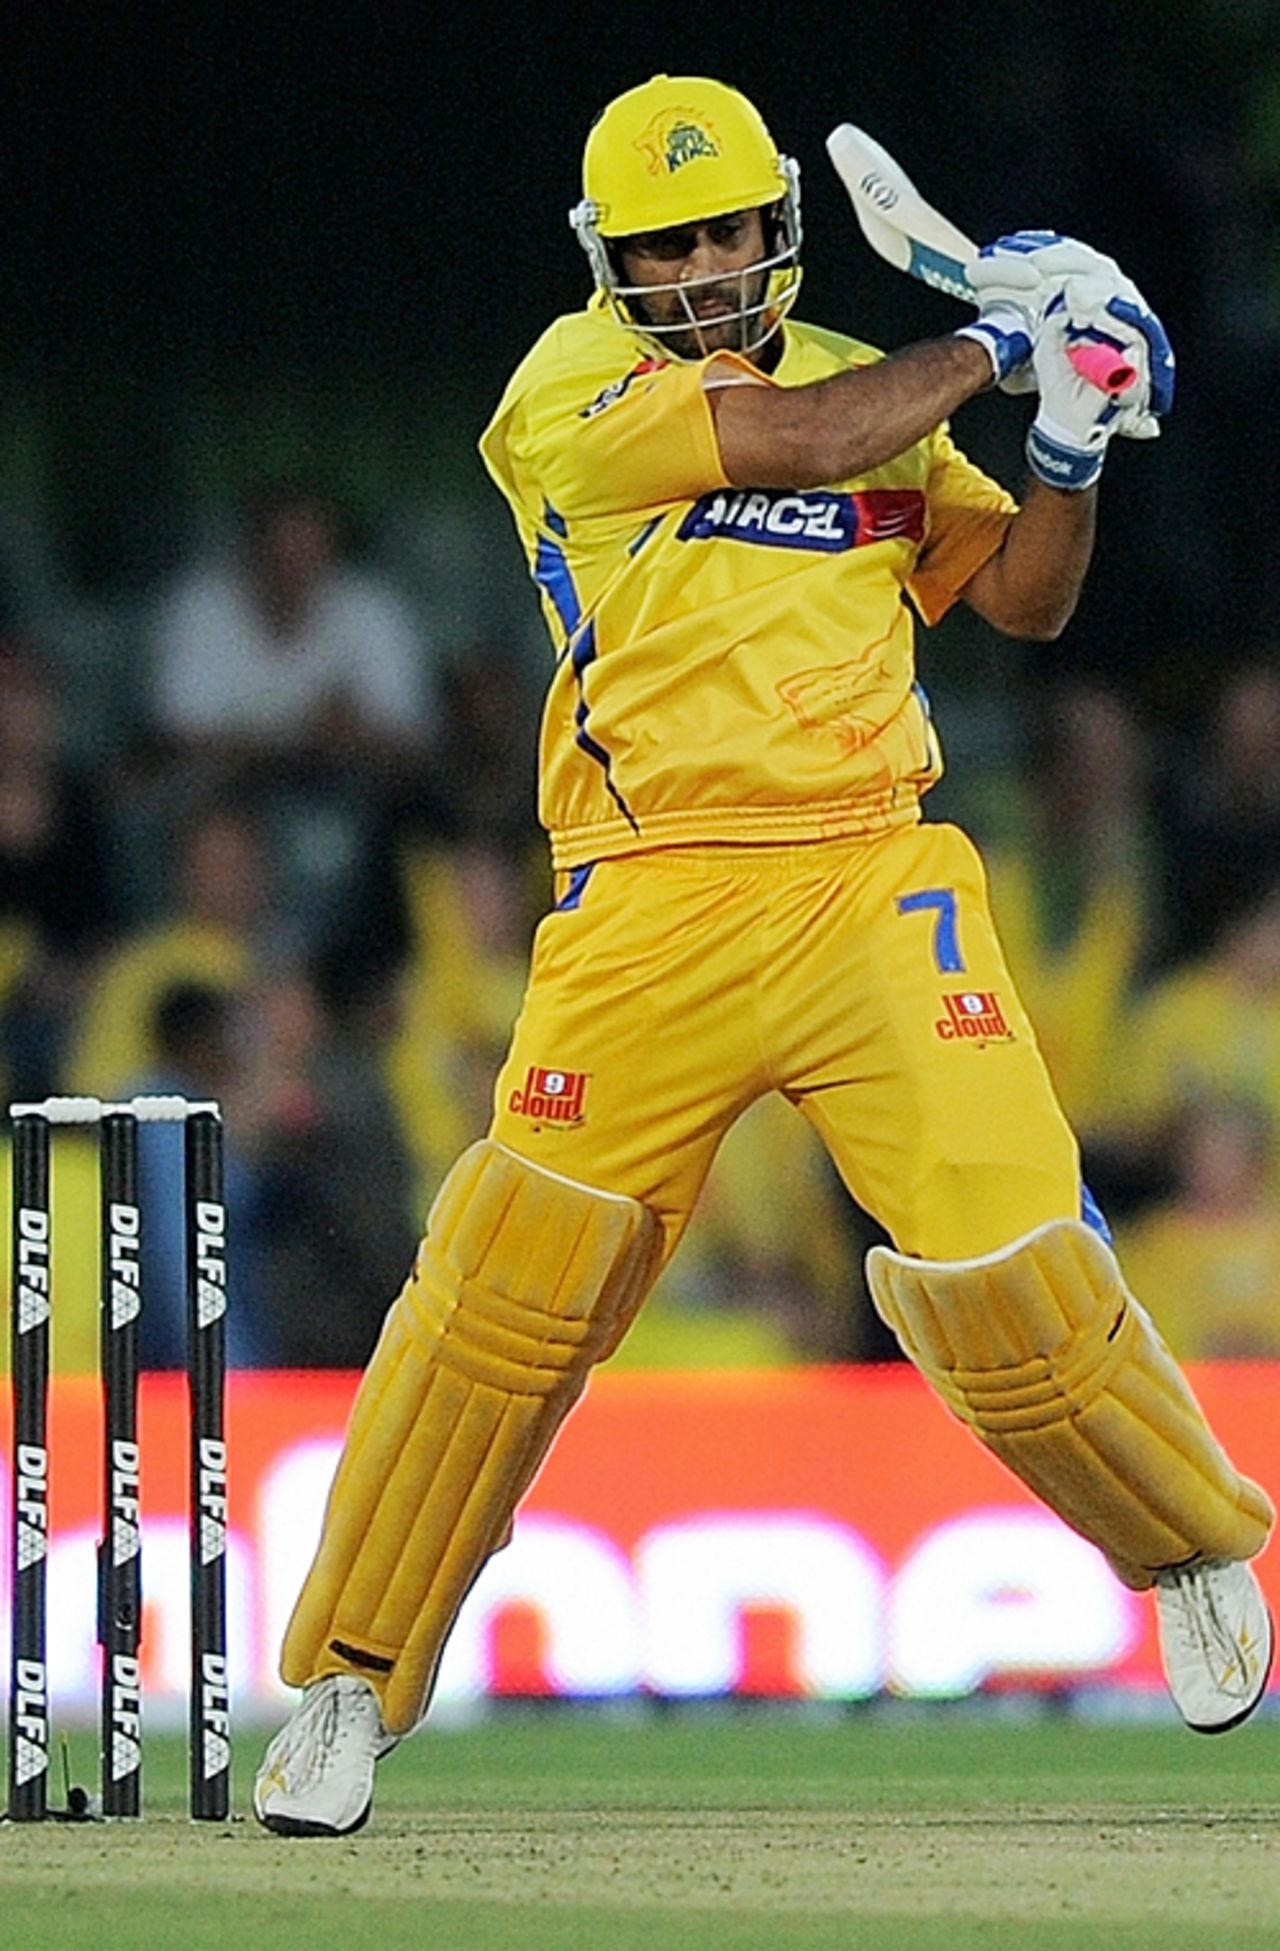 MS Dhoni gets innovative, Chennai Super Kings v Deccan Chargers, IPL, 29th match, East London, May 4, 2009